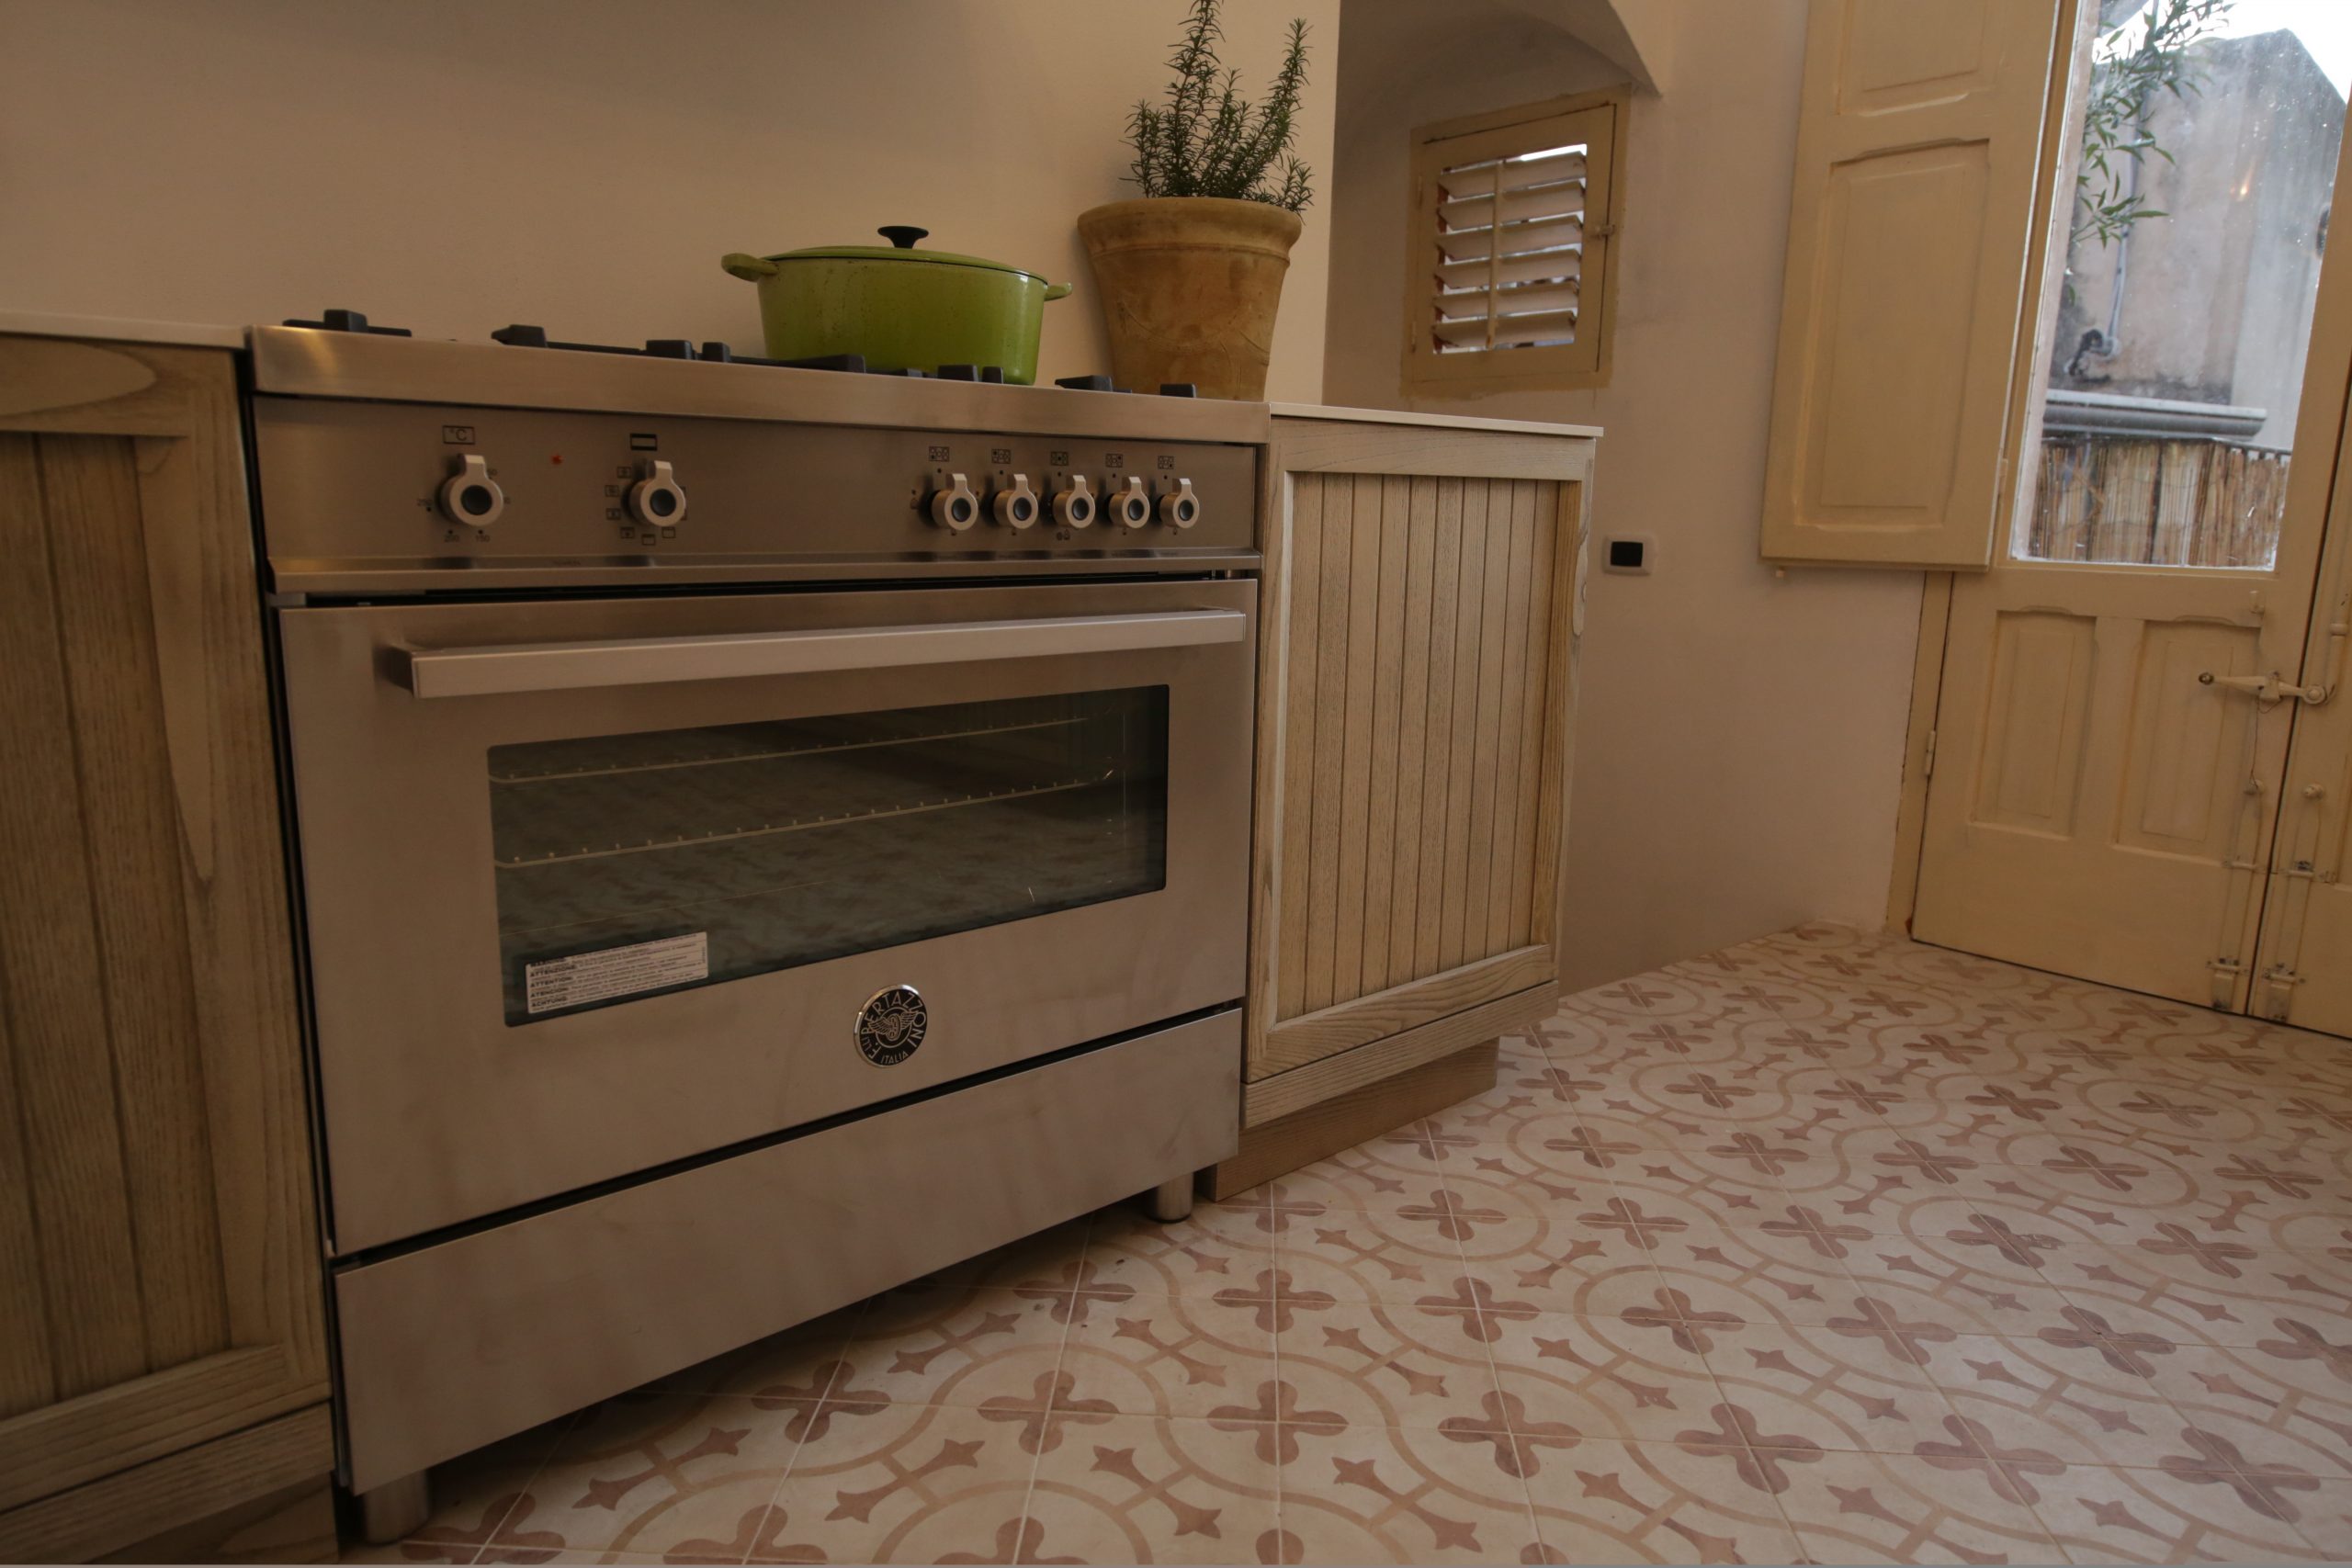 An over-sized stove in the kitchen of Lorrain Bracco's Italian vacation home.